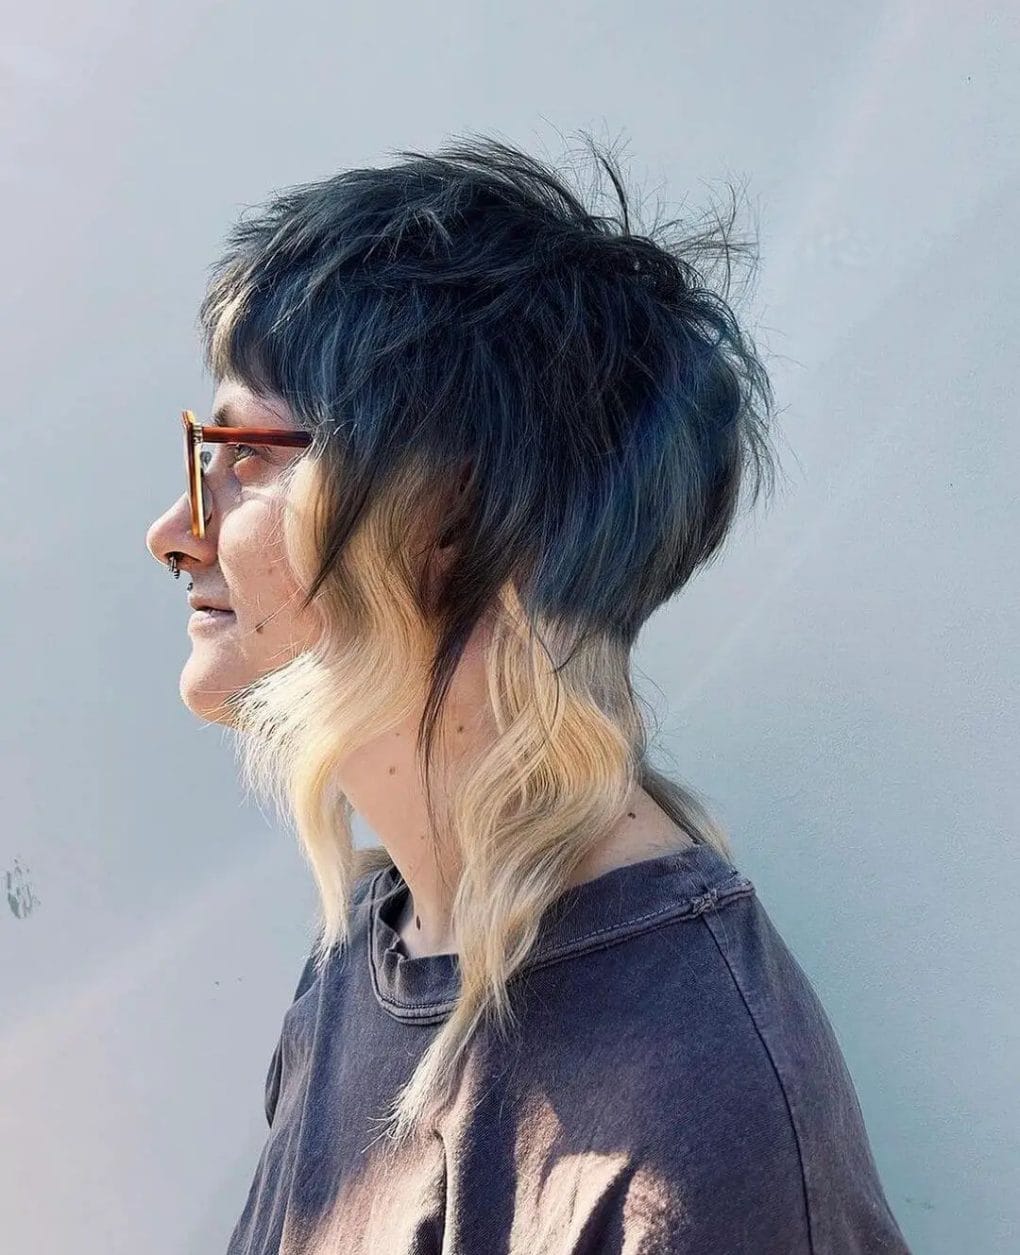 Rebellious jellyfish haircut featuring a dark to light color gradient from mysterious blues to creamy blondes.